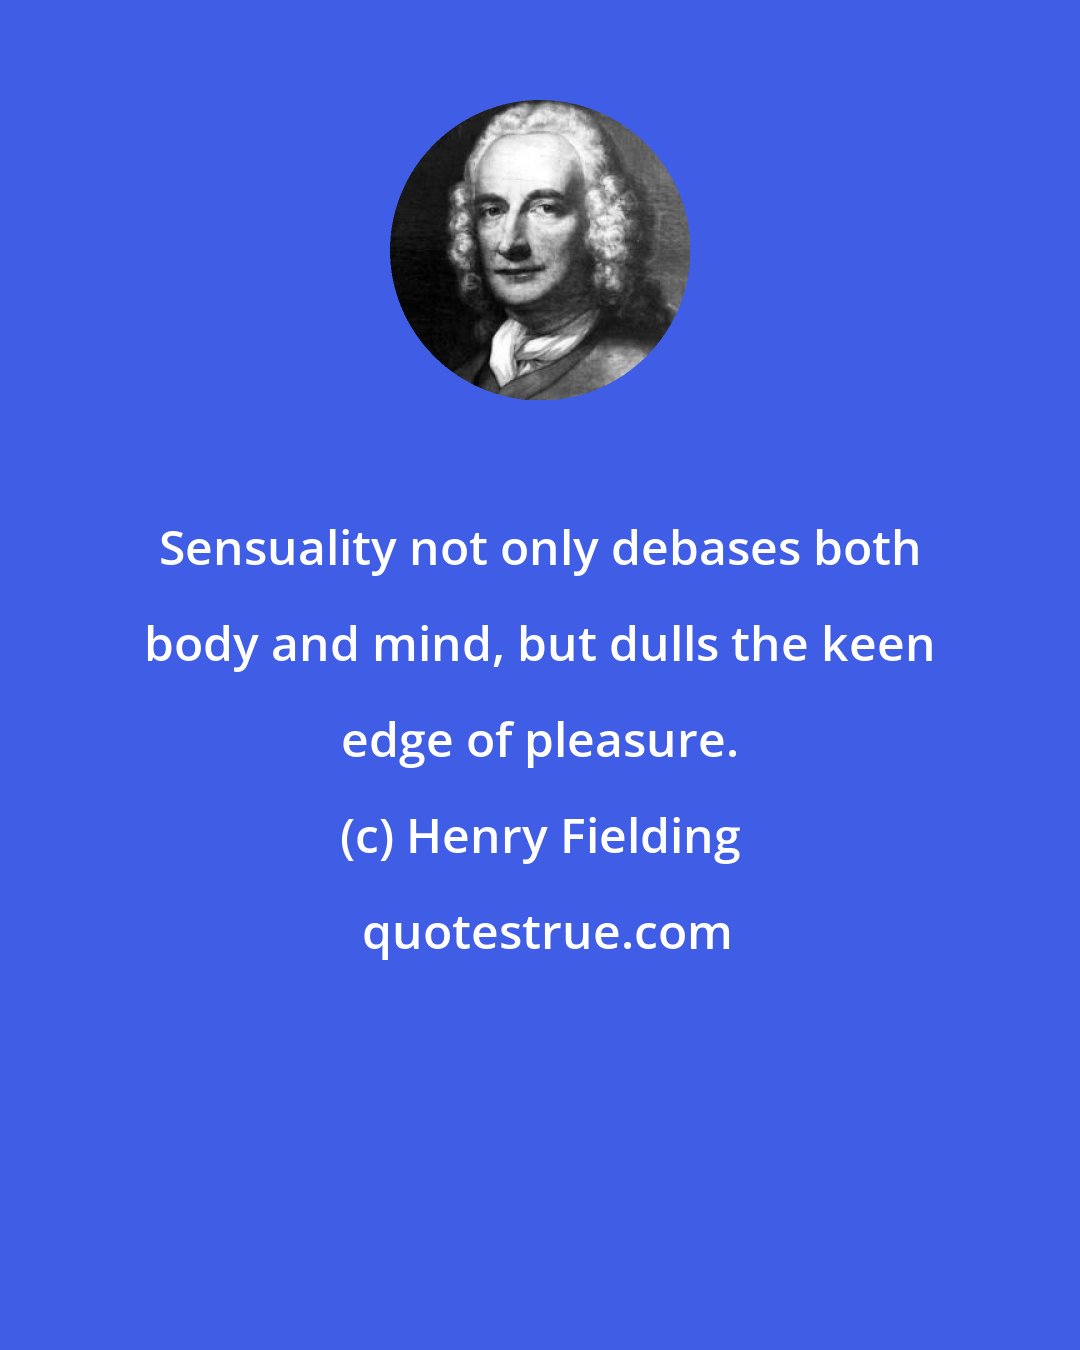 Henry Fielding: Sensuality not only debases both body and mind, but dulls the keen edge of pleasure.